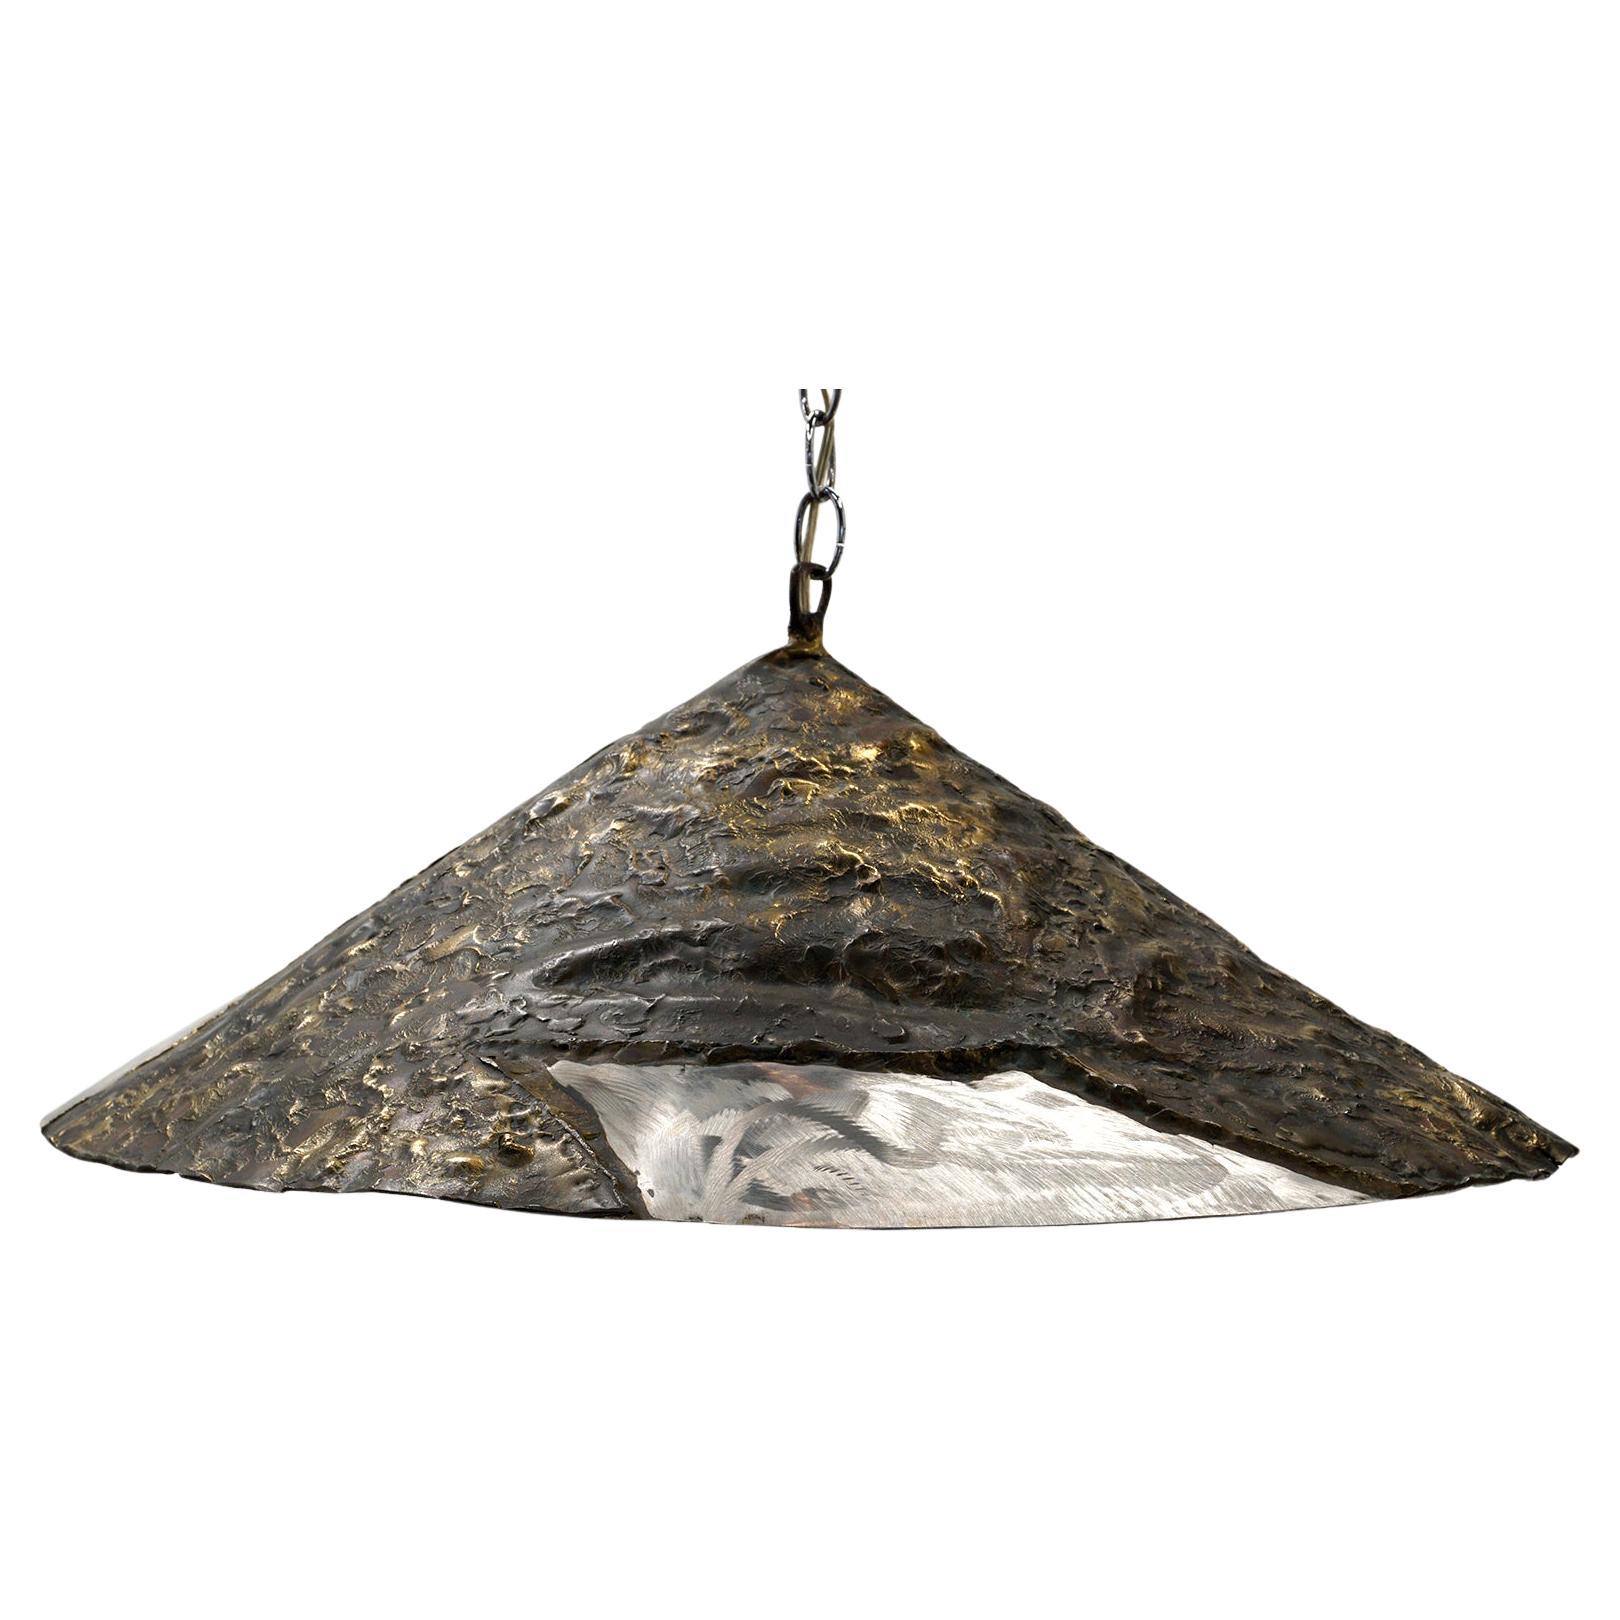 Silas Seandel Pendant Light, Patinated Brass and Aluminum, Etched Signature For Sale